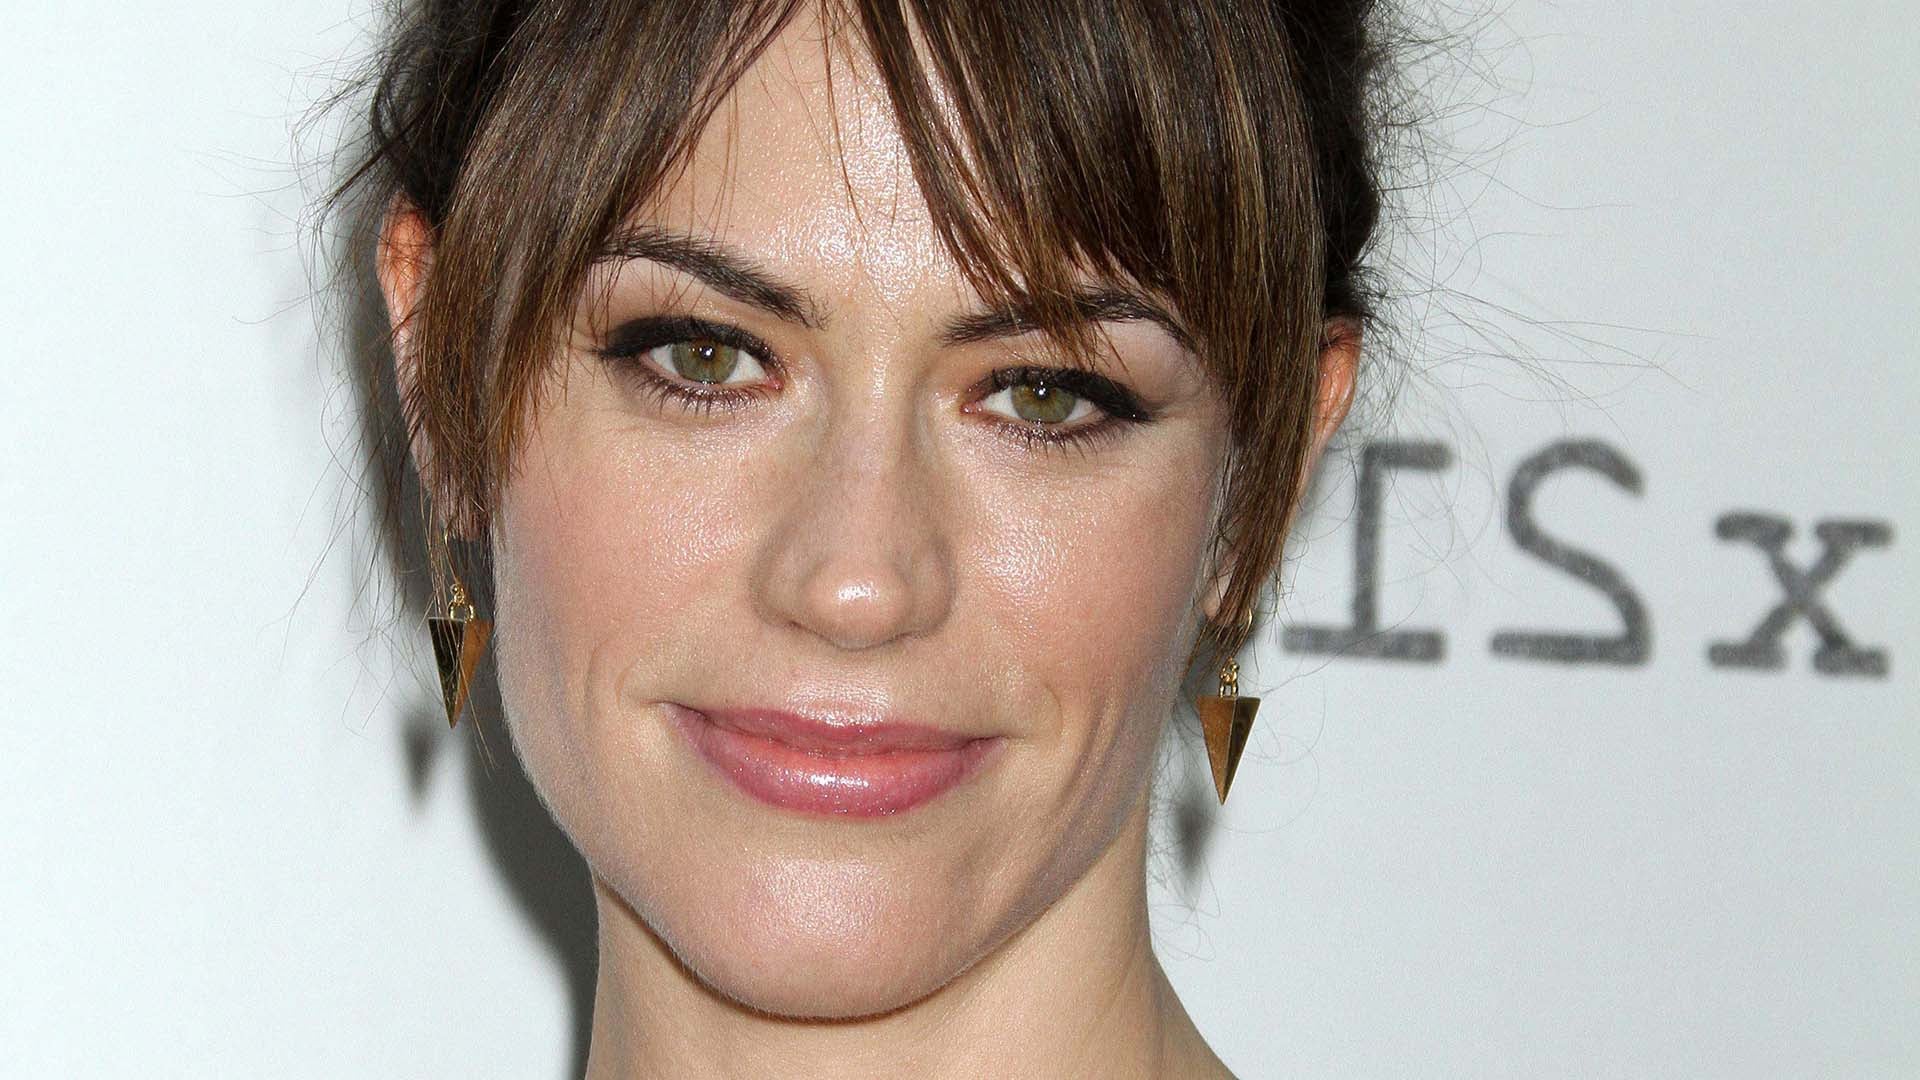 Maggie Siff Face Wallpaper 57927 1920x1080px